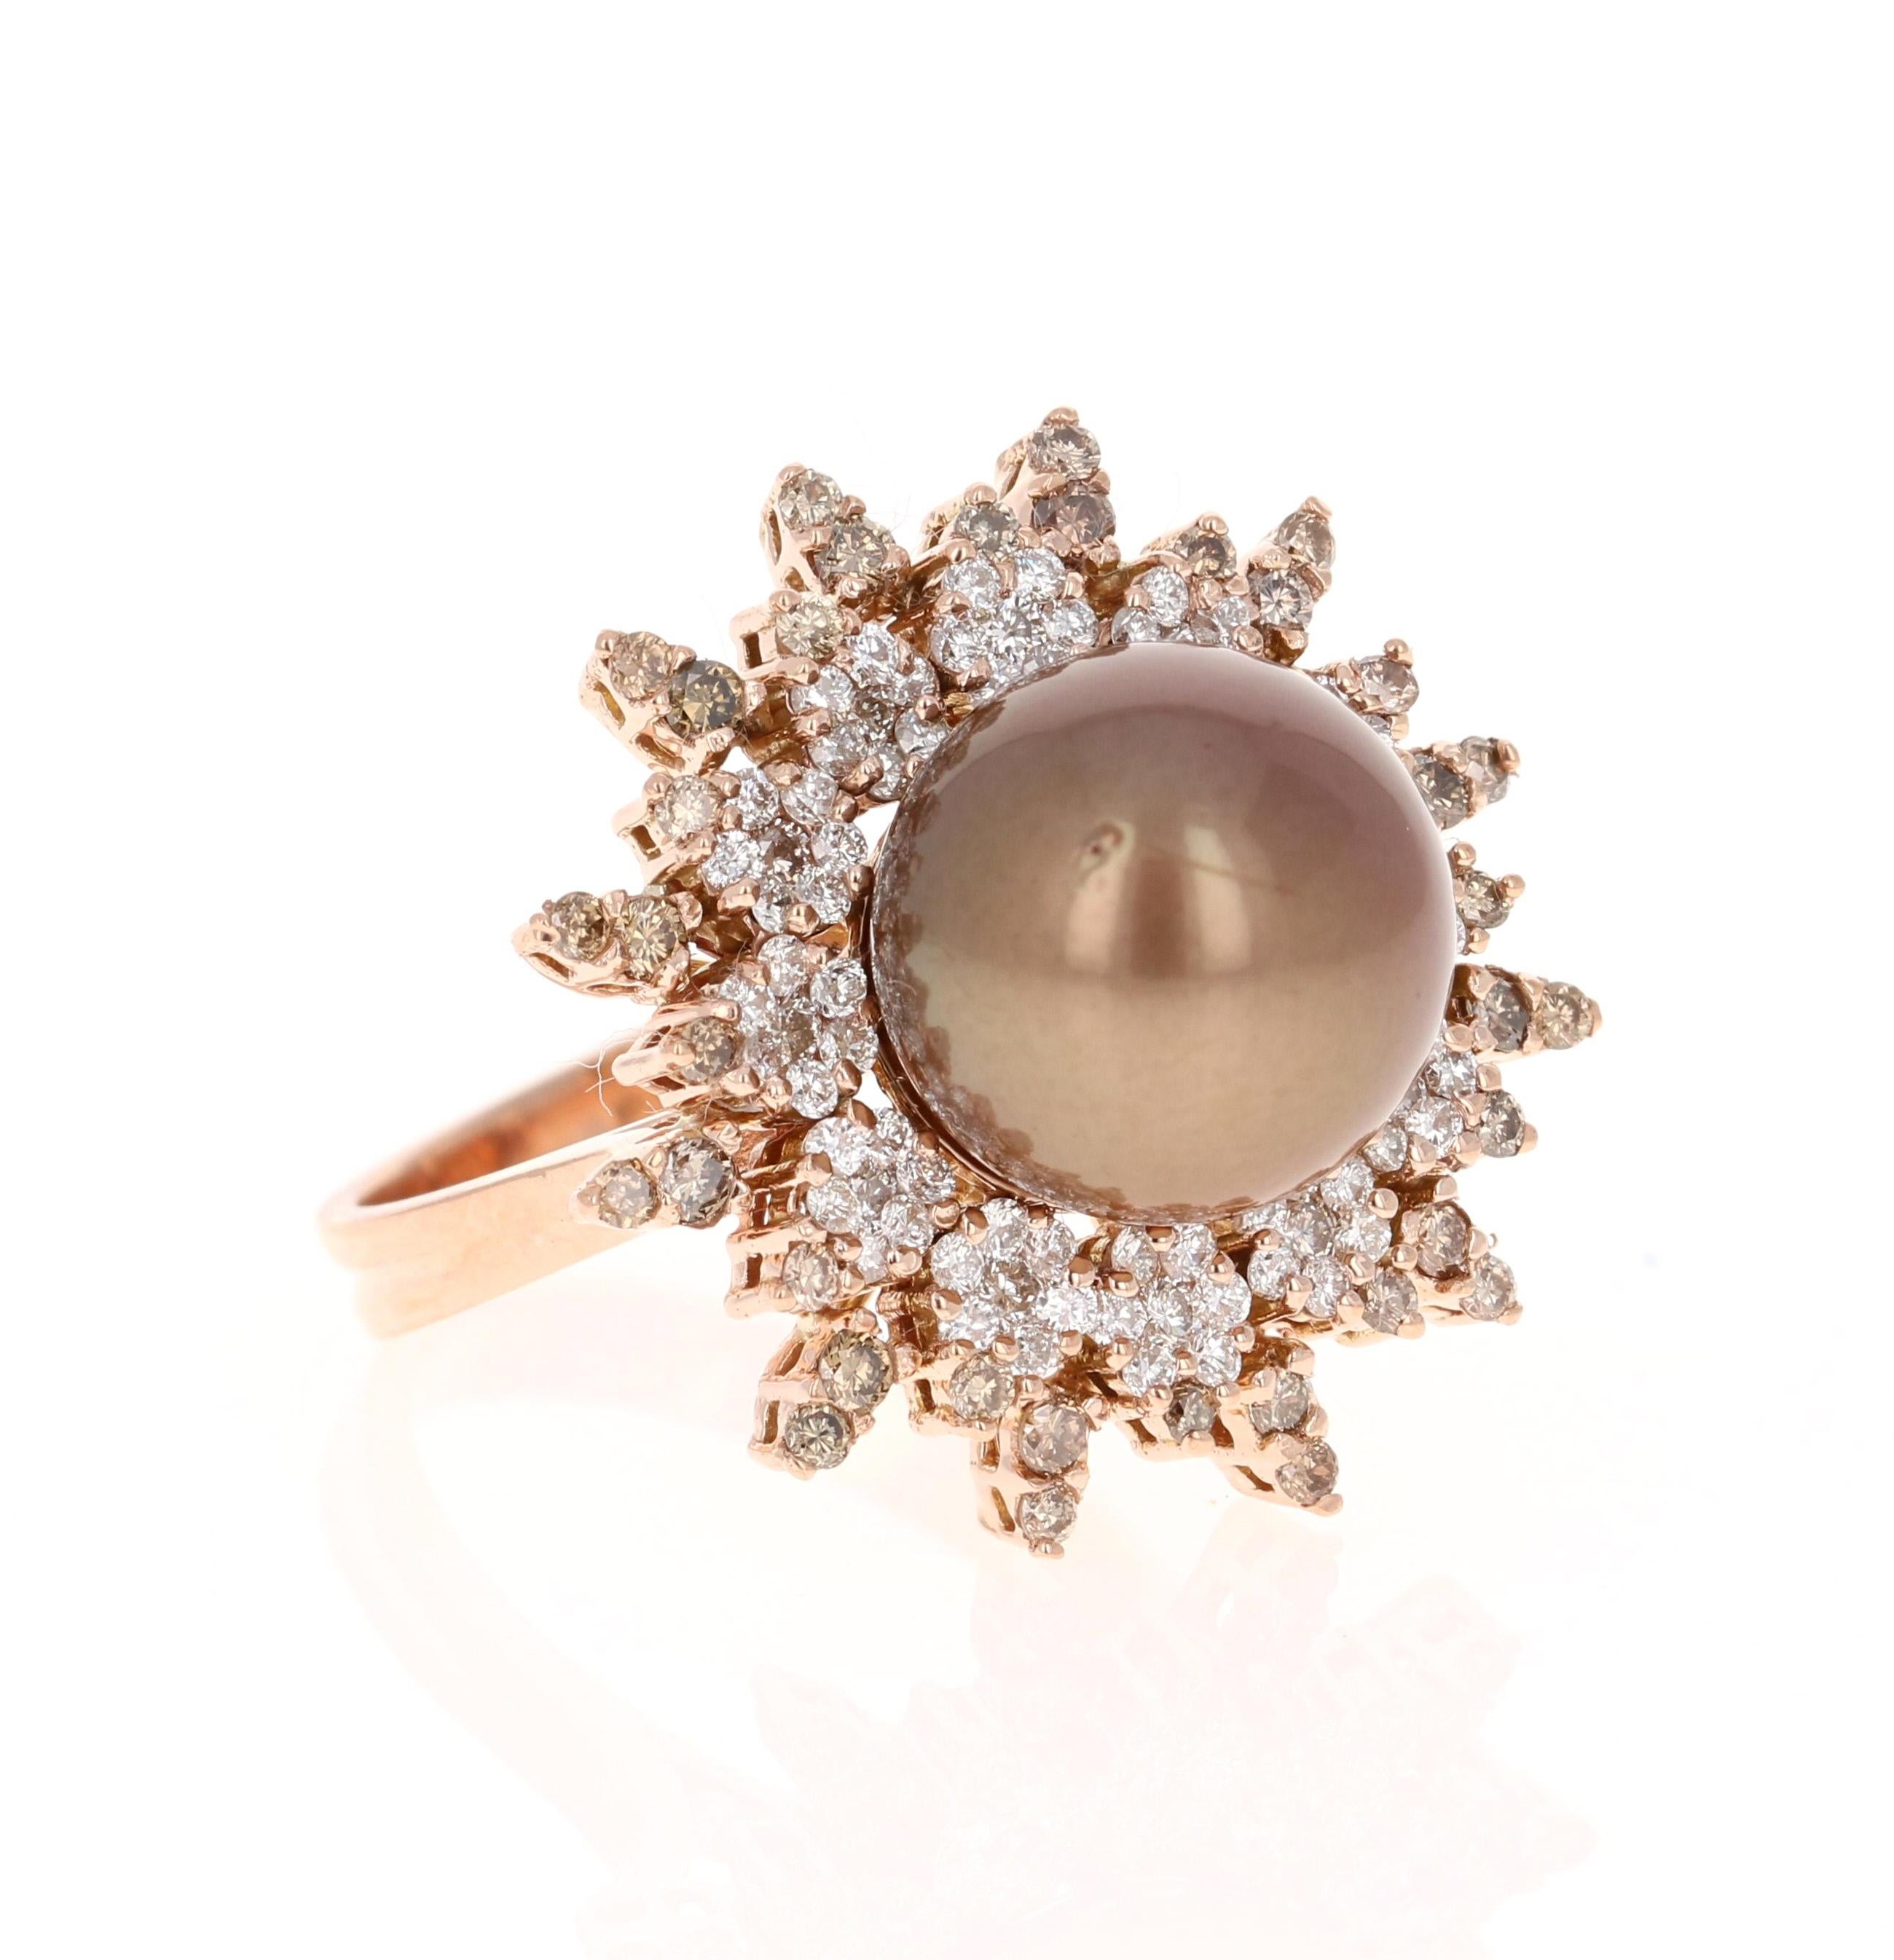 This beautiful Chocolate Tahitian Pearl and Diamond ring has a 11.5 mm Chocolate Pearl and is surrounded by 84  Round Cut Diamonds that weigh 0.80 carats (Clarity: VS, Color: H) and 36 Round Cut Champagne Diamonds that weigh 0.51 carats. The total